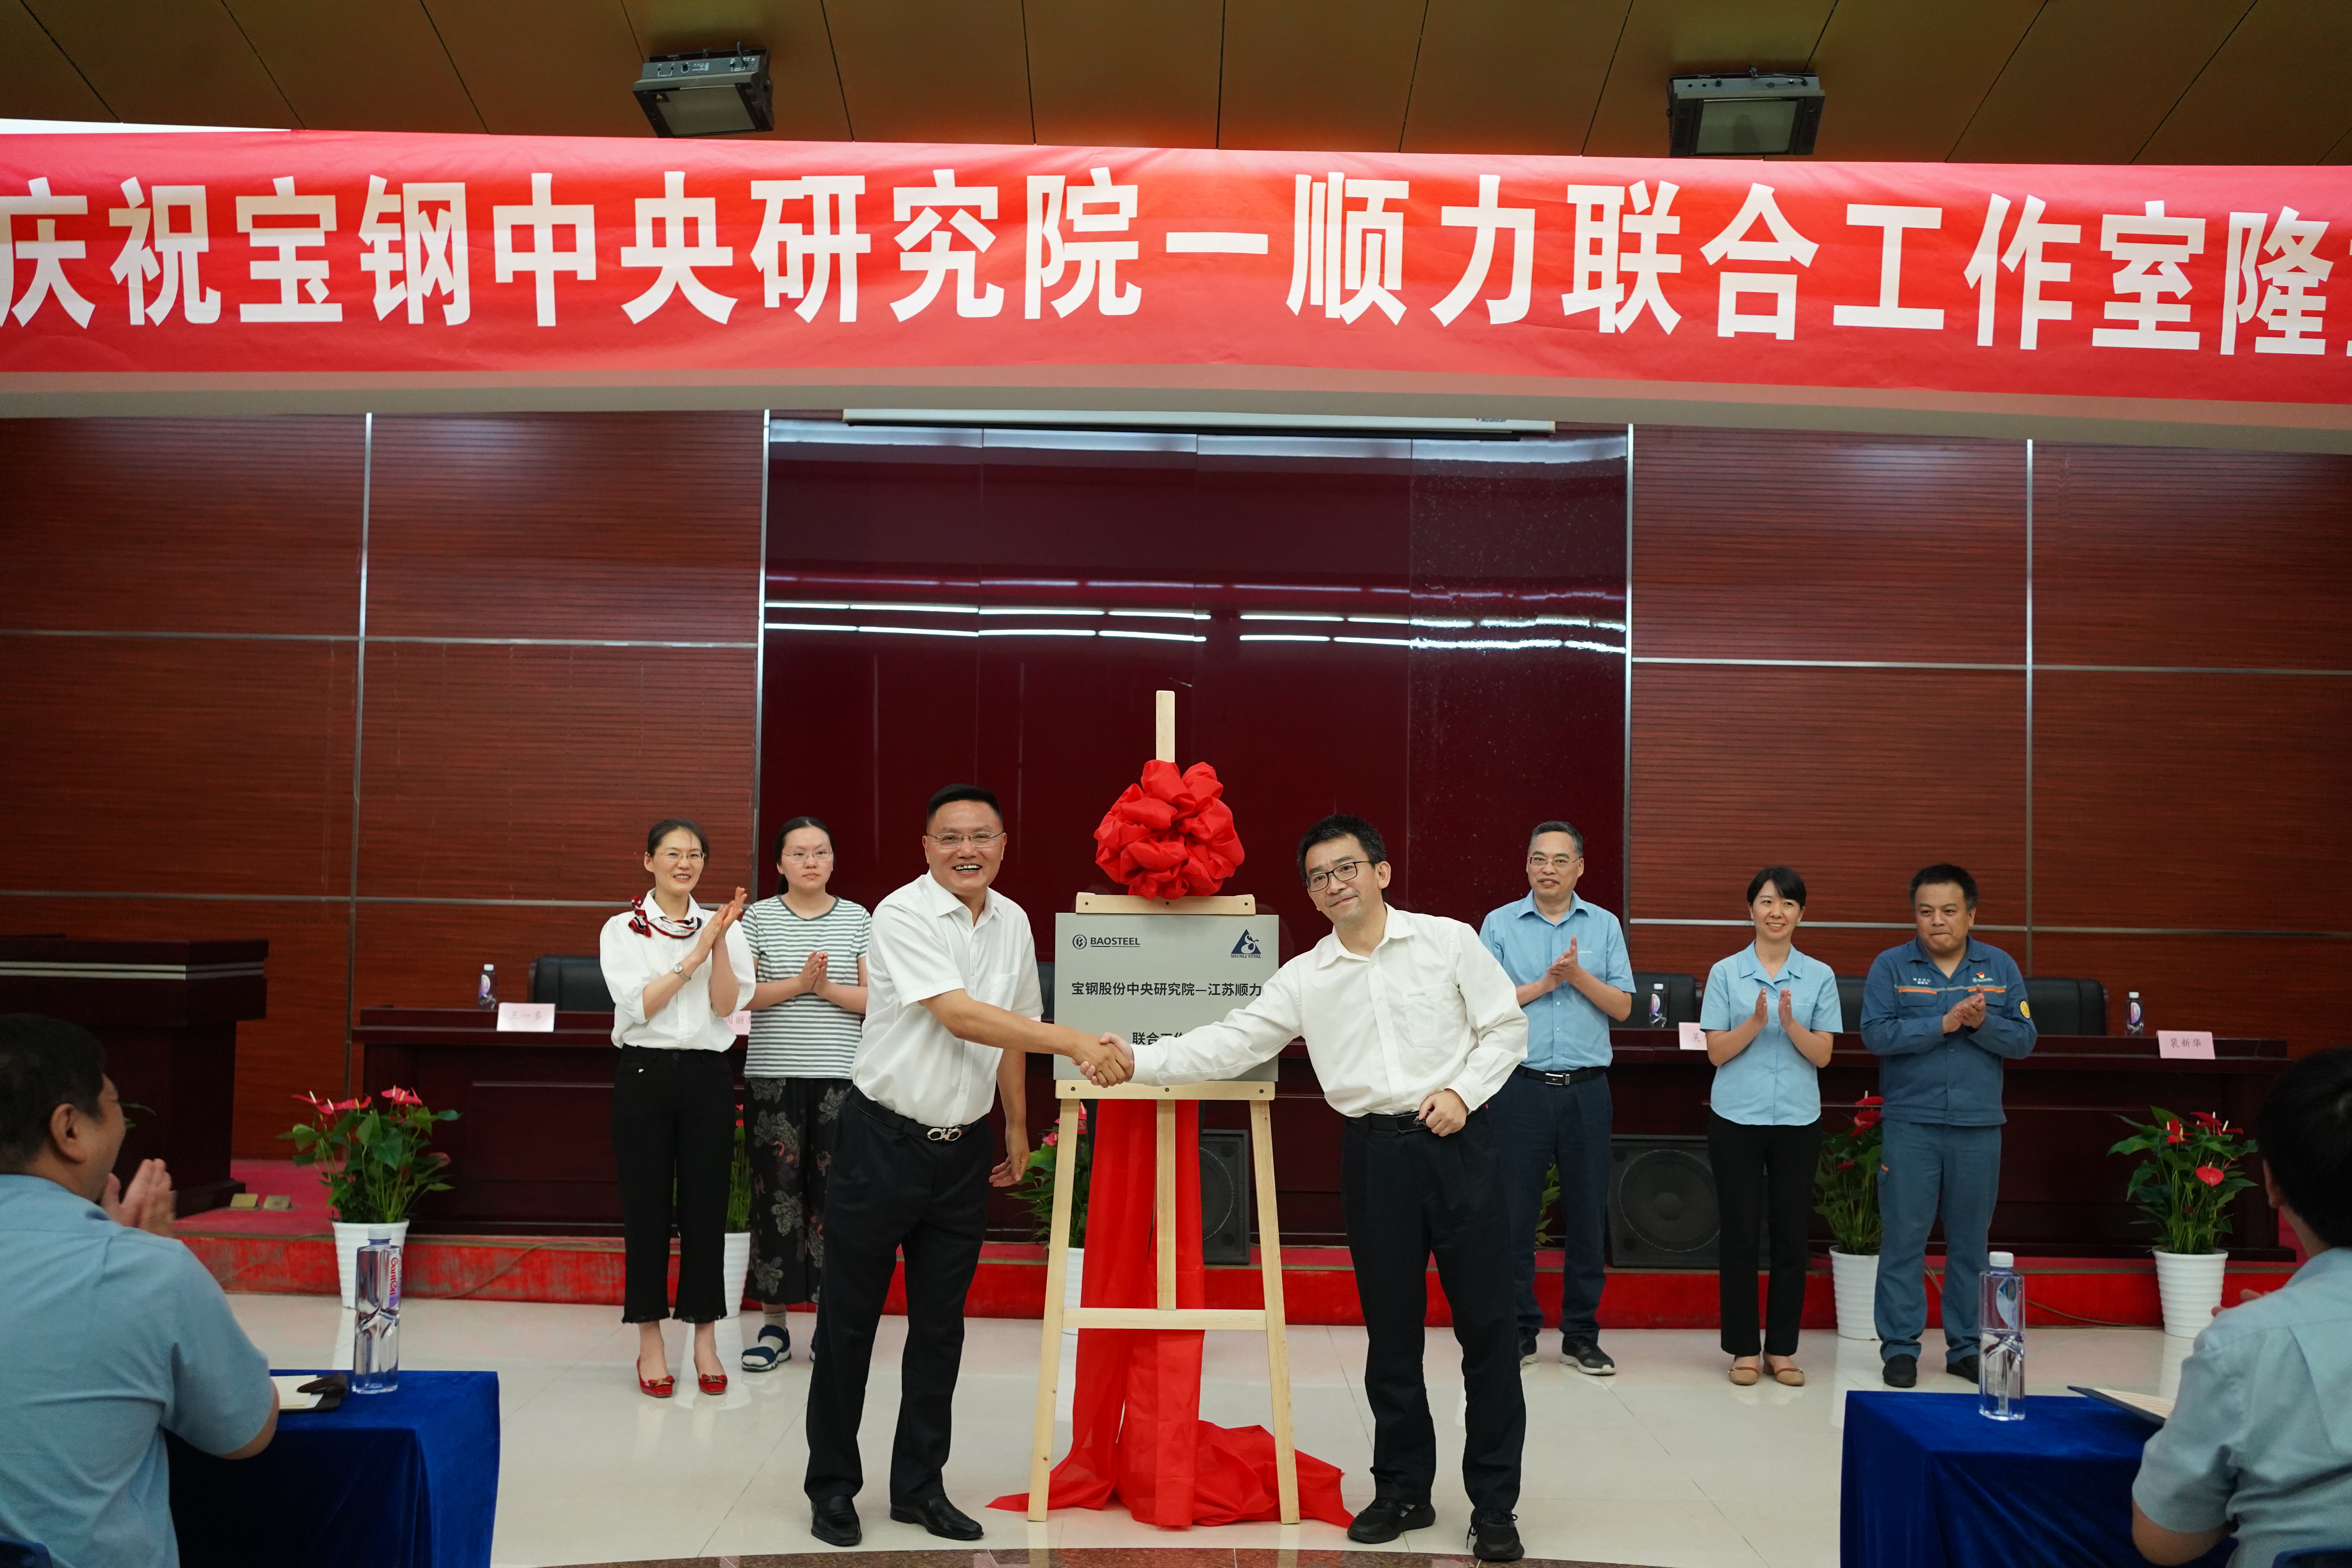 Baowu Group Baosteel Central Research Institute-Shunli Joint Studio was grandly unveiled in Shunli Steel Group